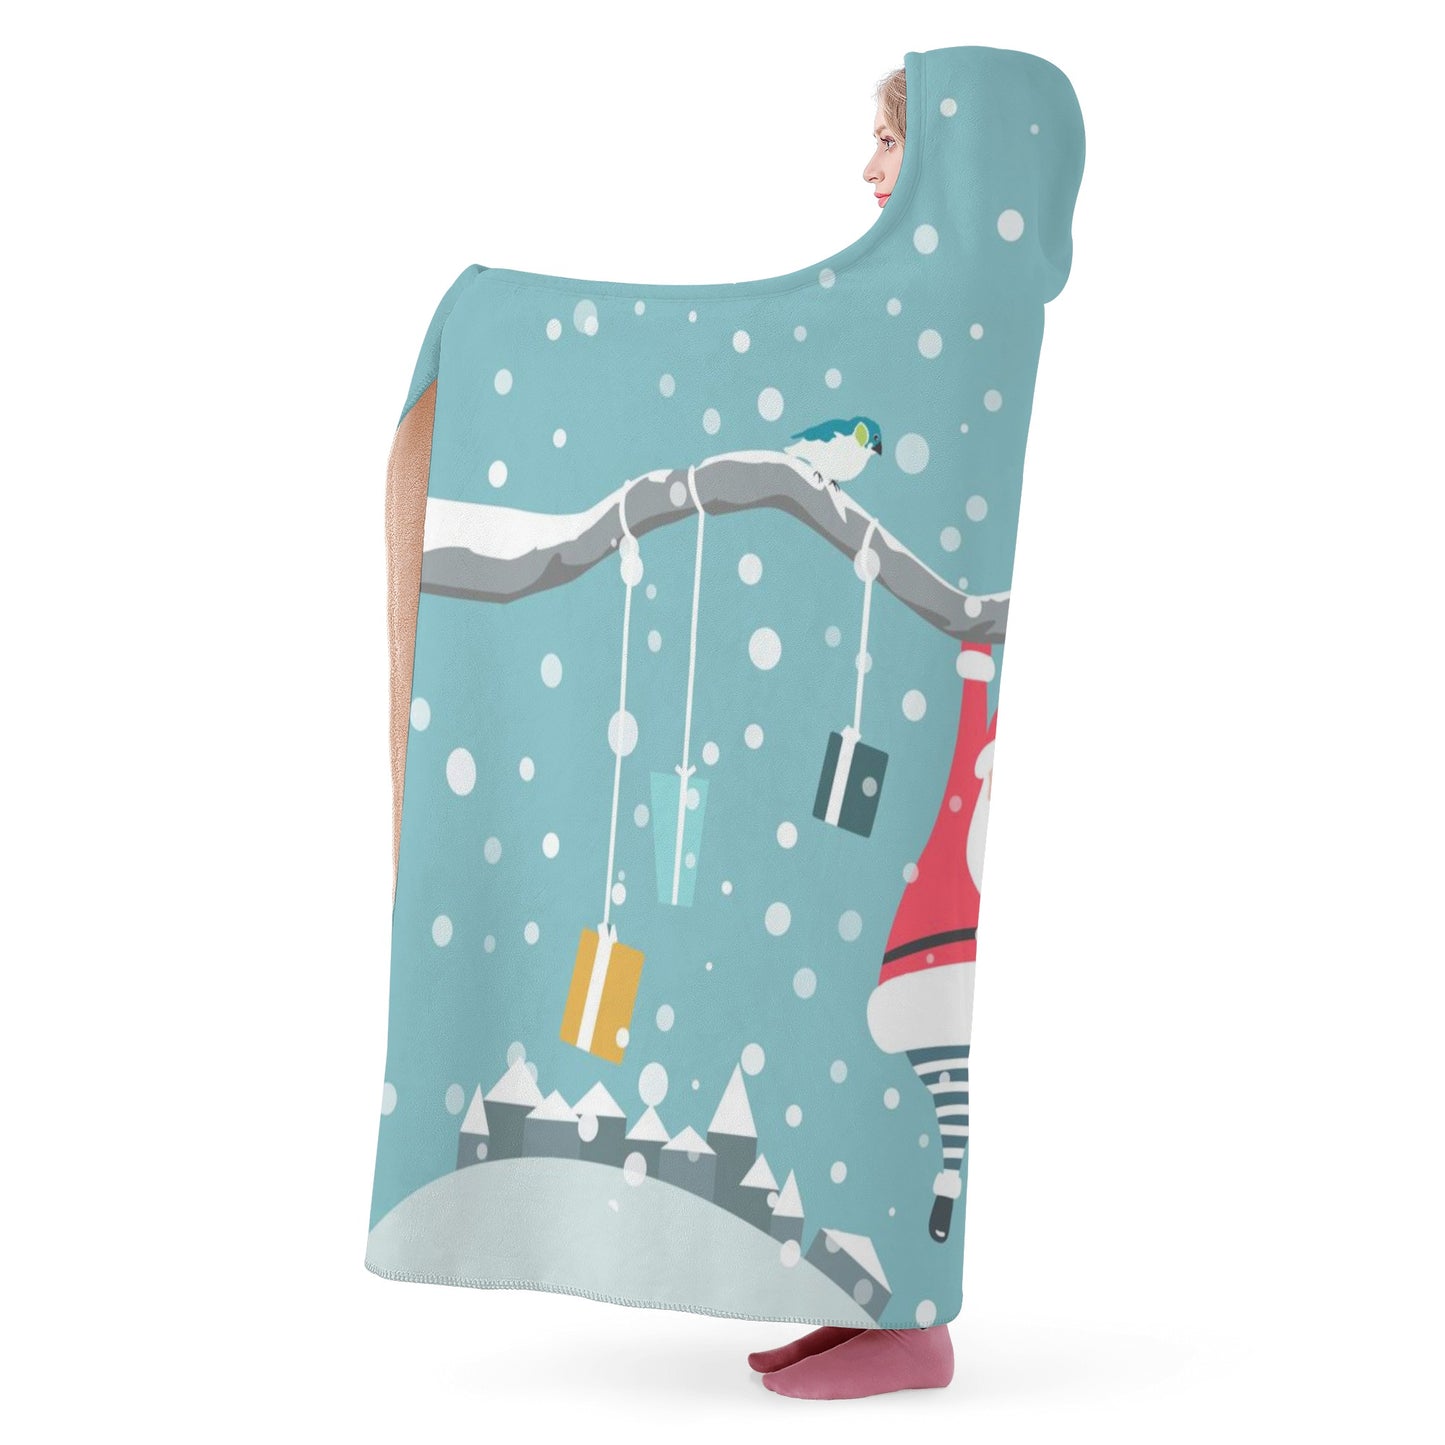 Santa is Hanging Around with this Hooded Blanket